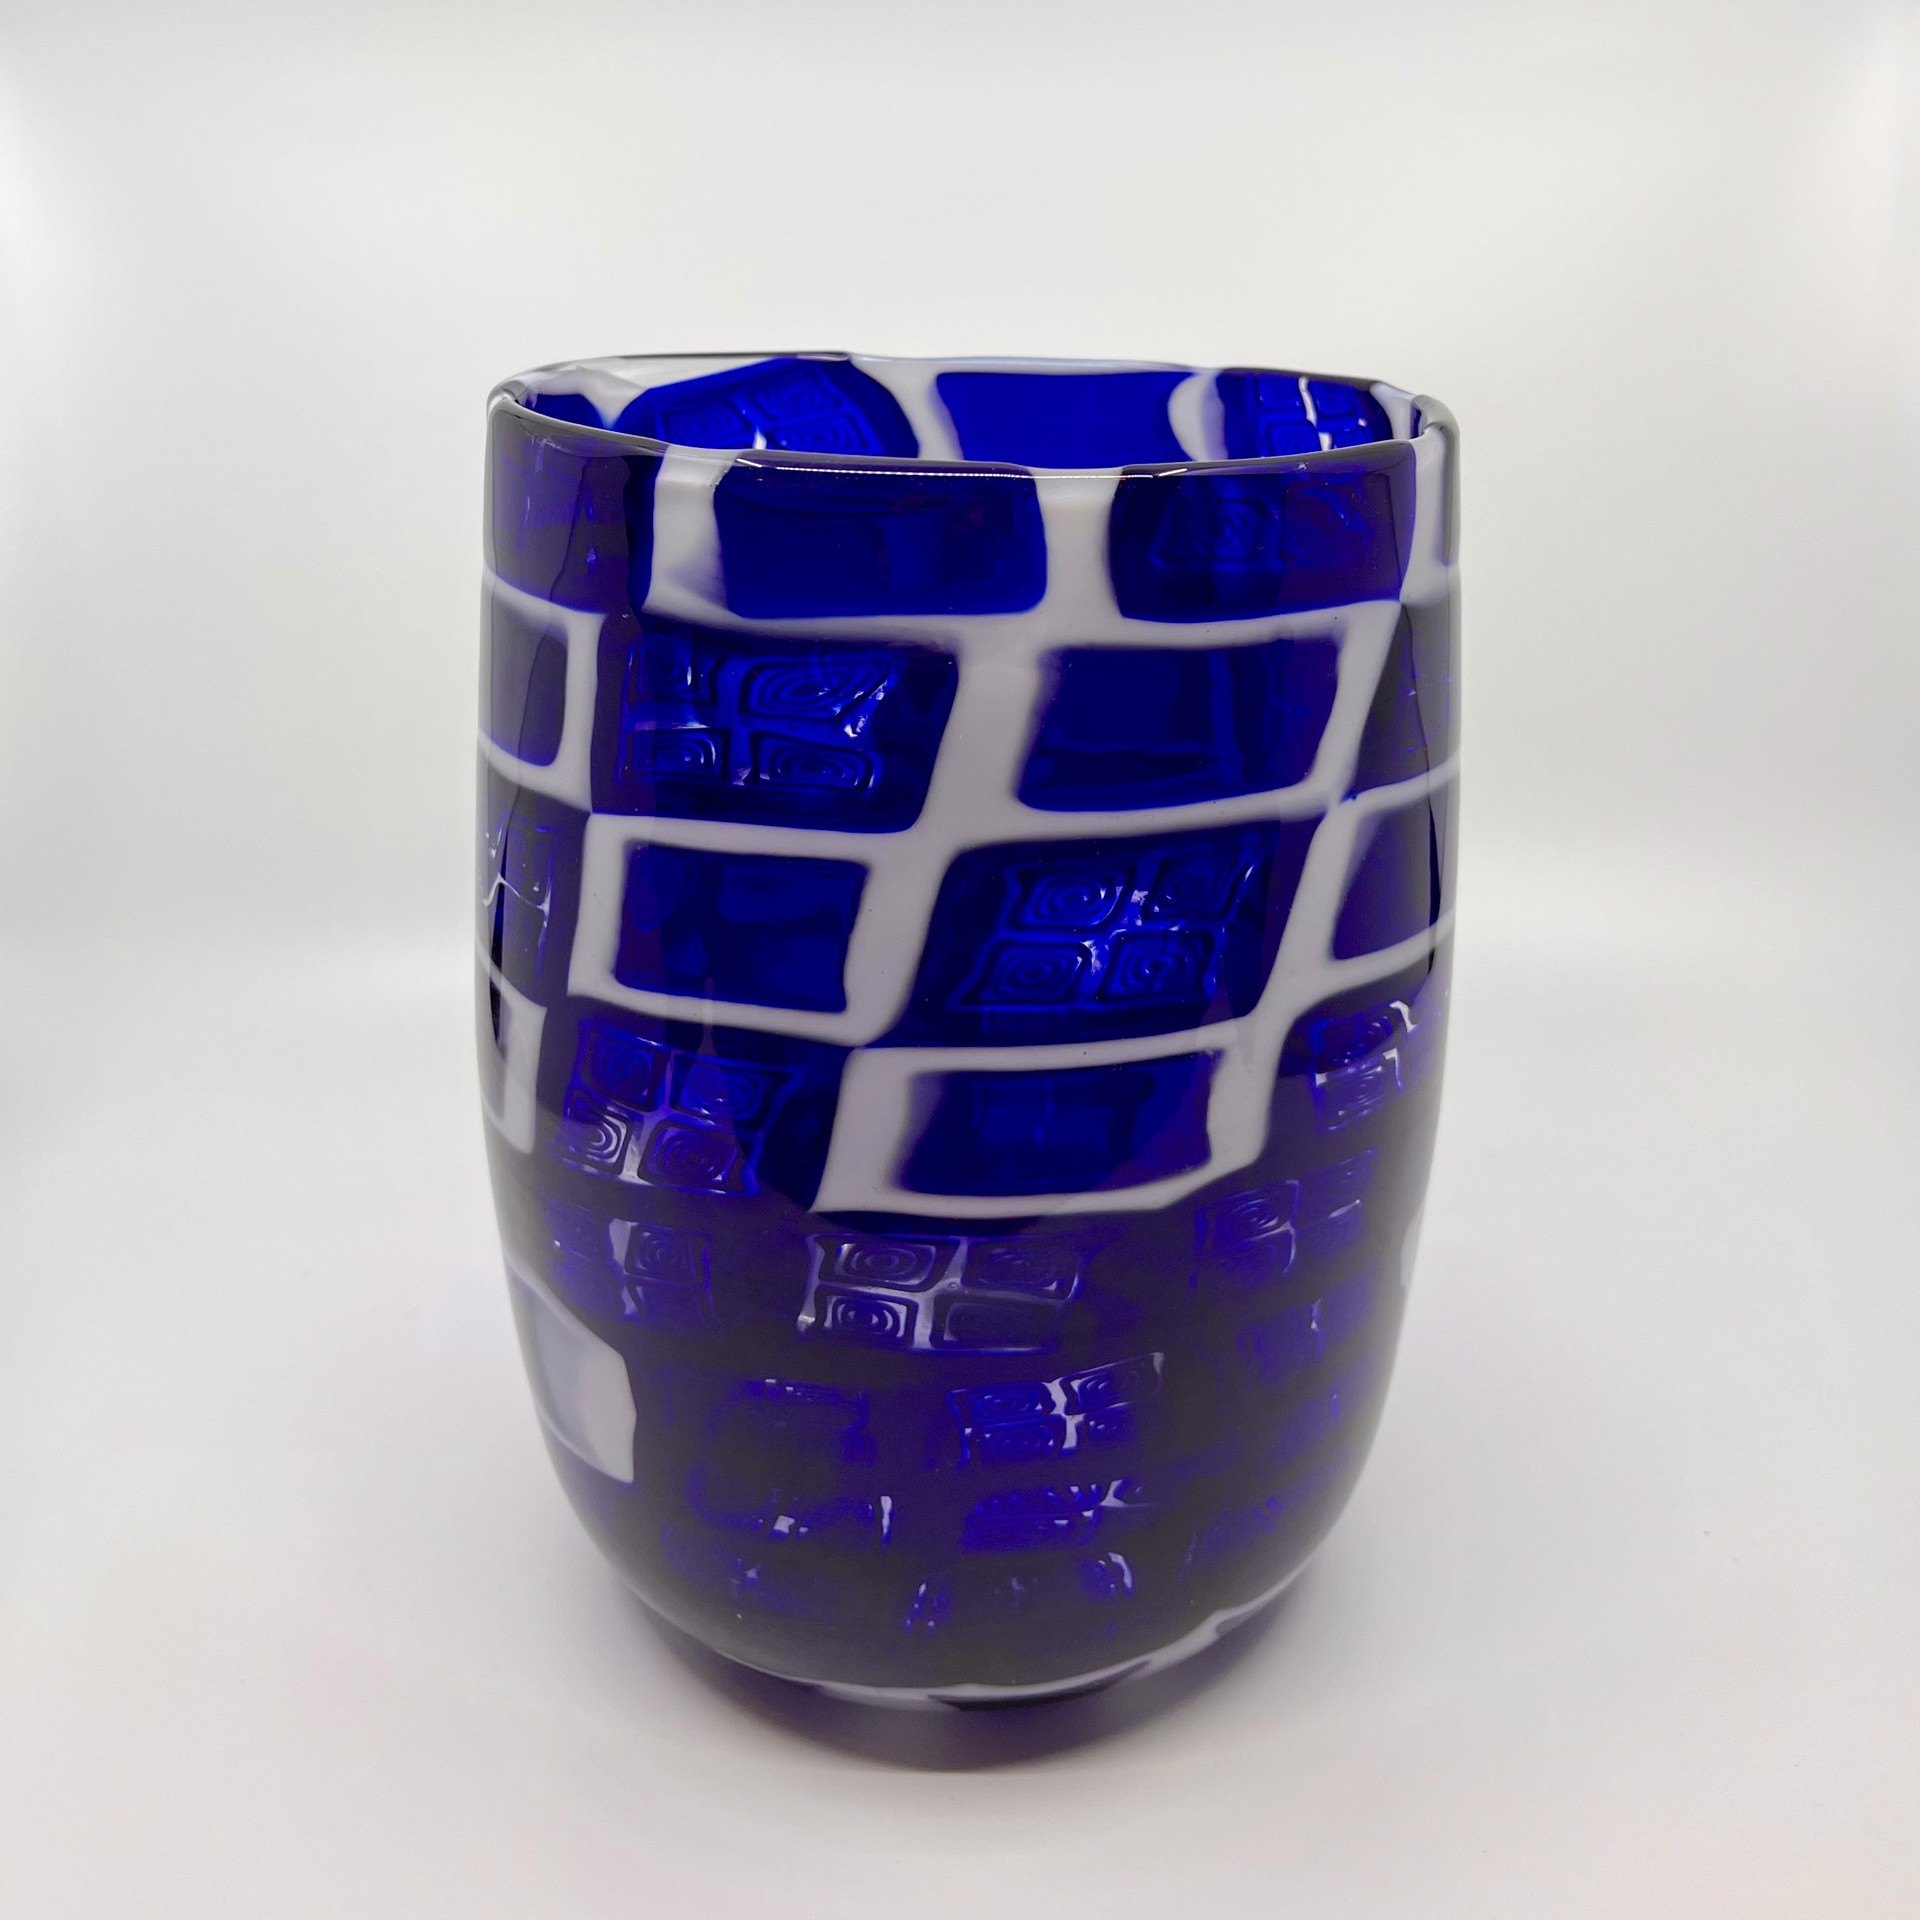 Tall Cobalt Blue Bowl/Vase with White Accent by John Glass